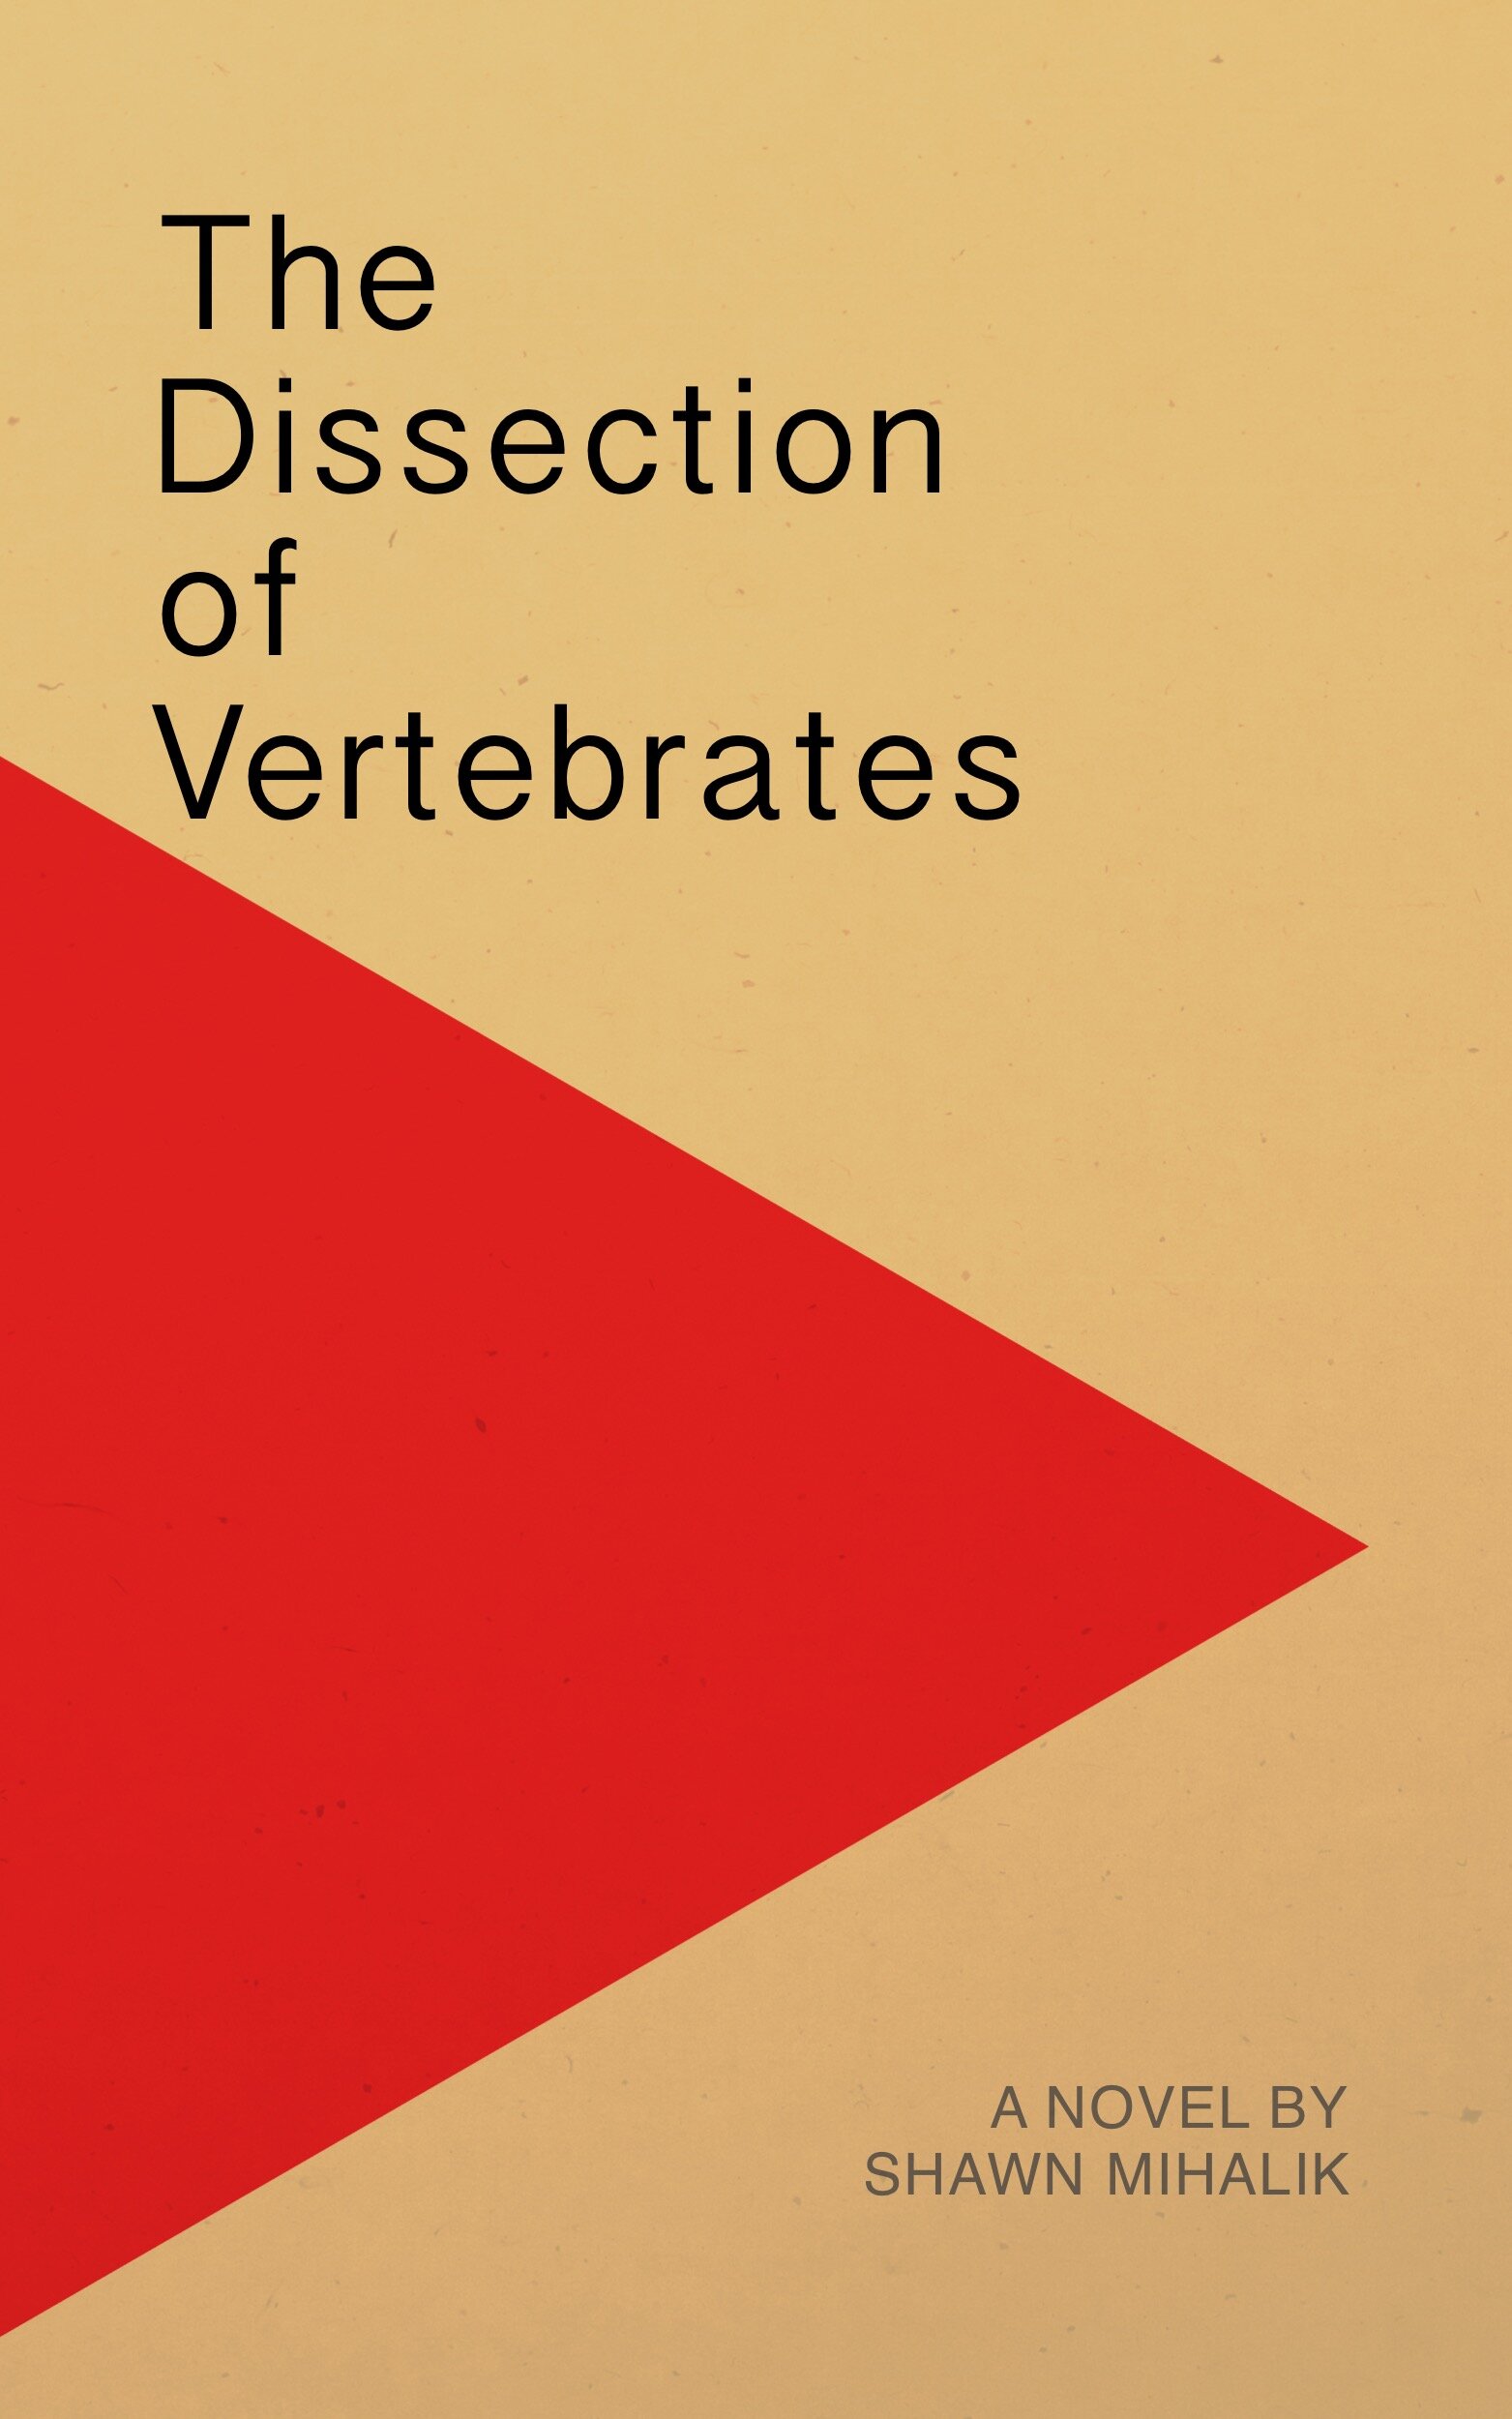   Title:  The Dissection of Vertebrates   Publisher:  Asymmetrical Press   Release Date:  January 9, 2018   Genre:  Novel / Literary Fiction   Length:  359 pages   Paperback     Amazon    Ebook     Kindle  